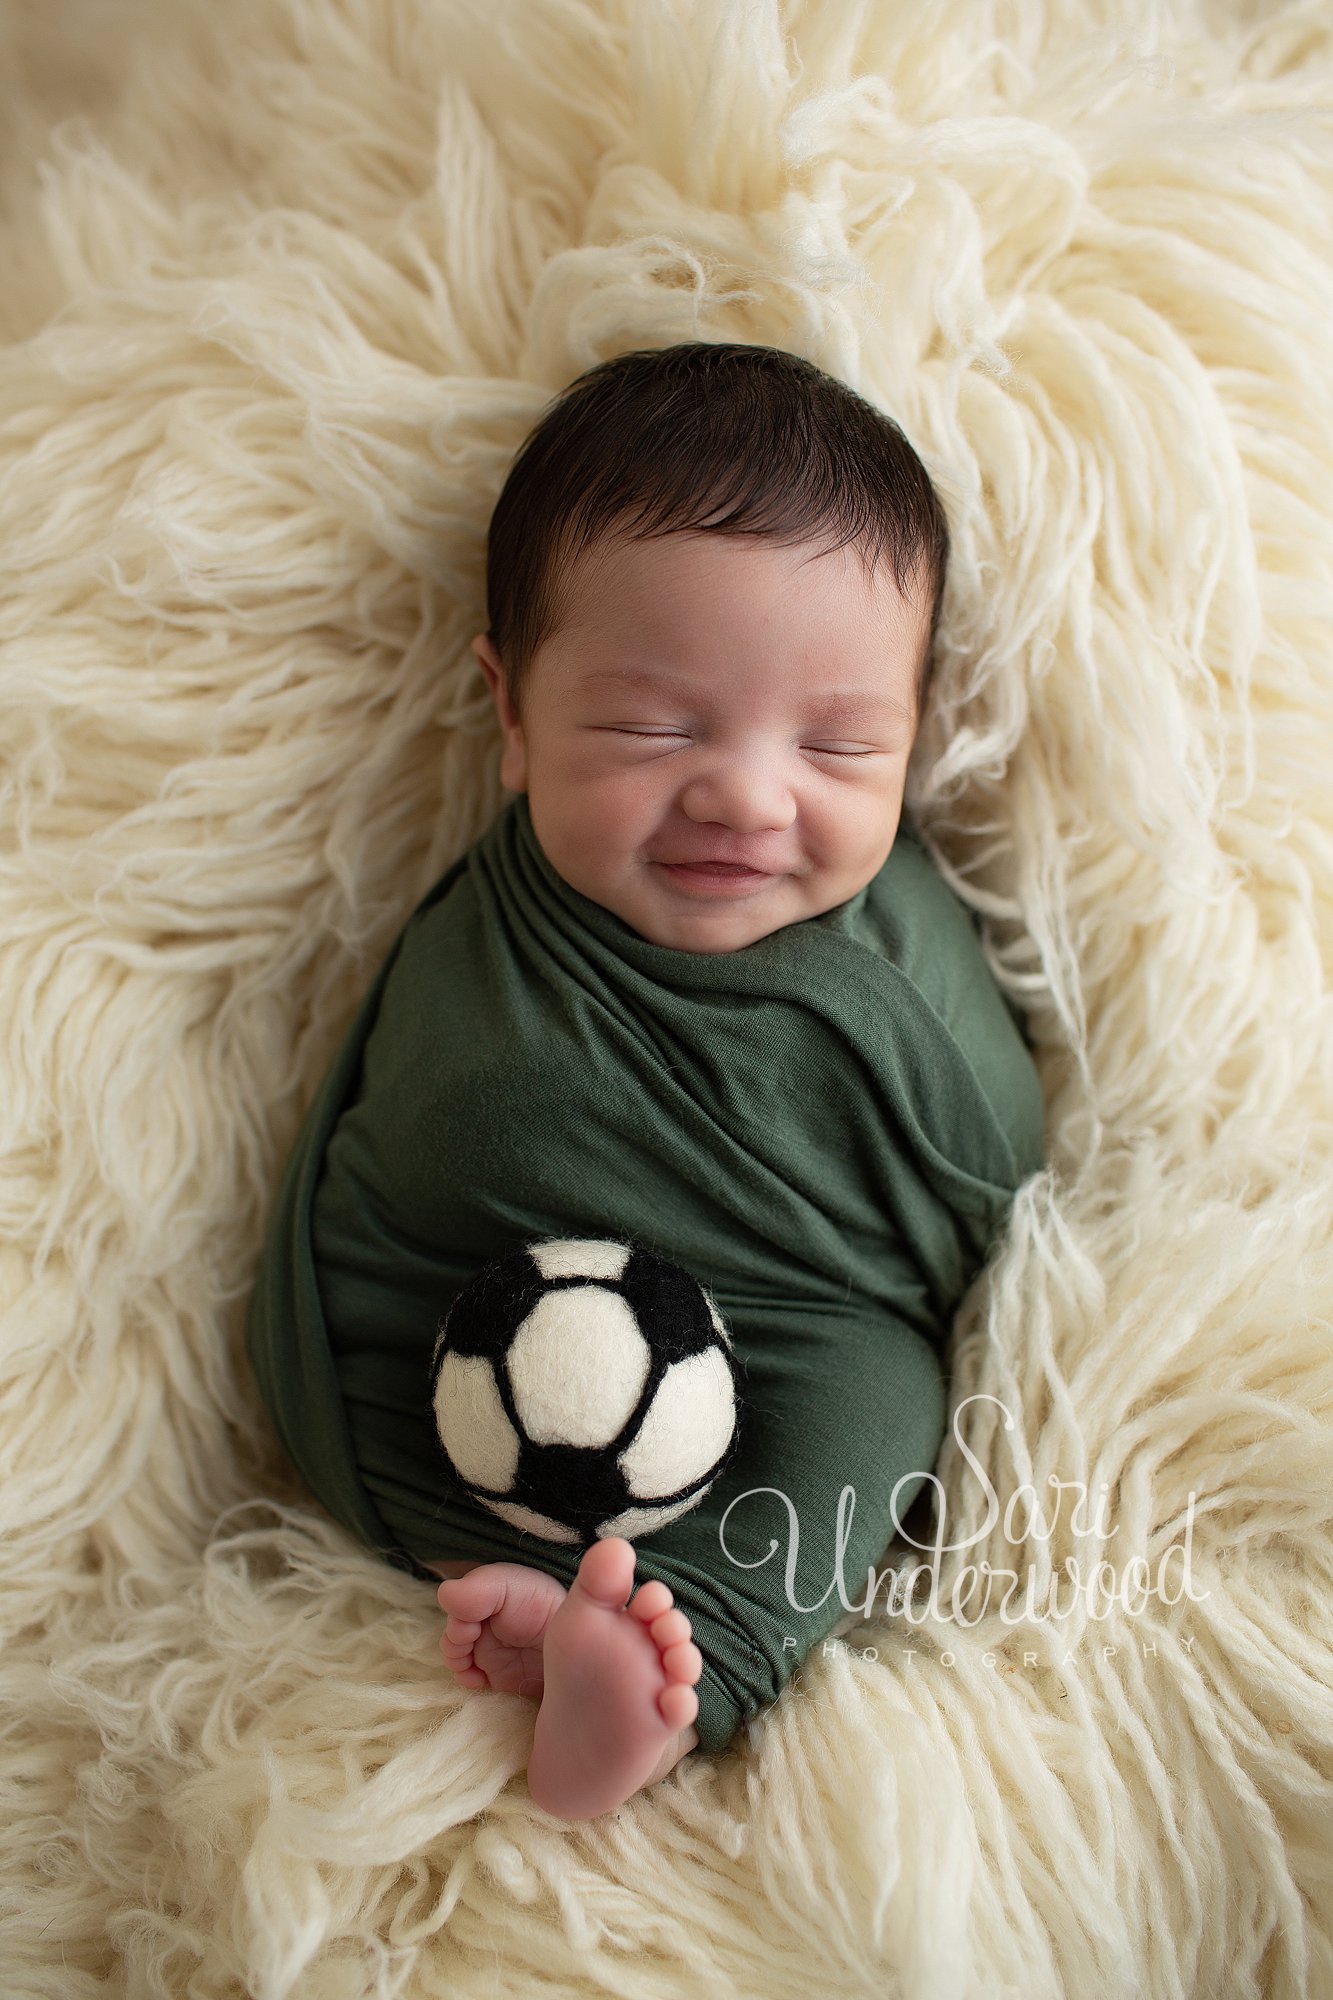 newborn baby boy smiling with a soccer ball